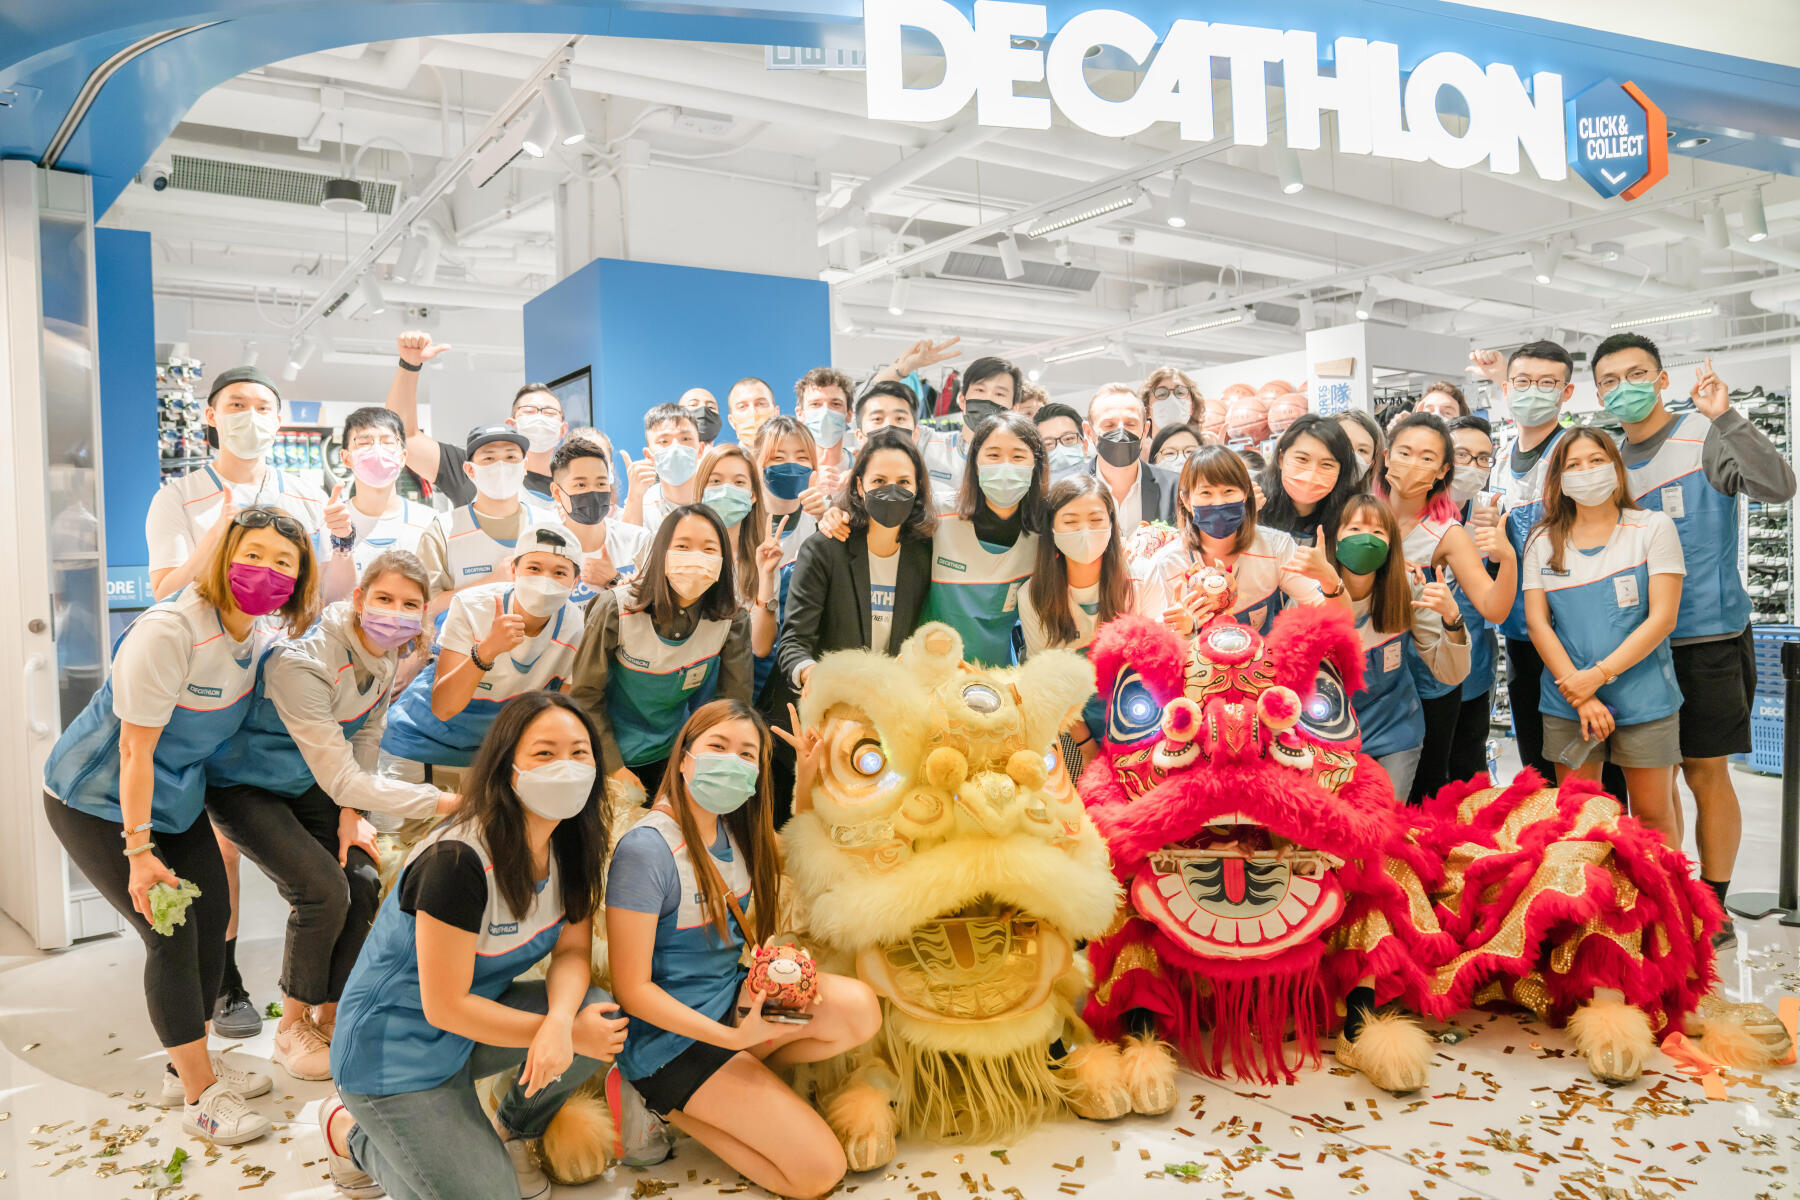 MA ON SHAN STORE GRAND OPENING - DECATHLON